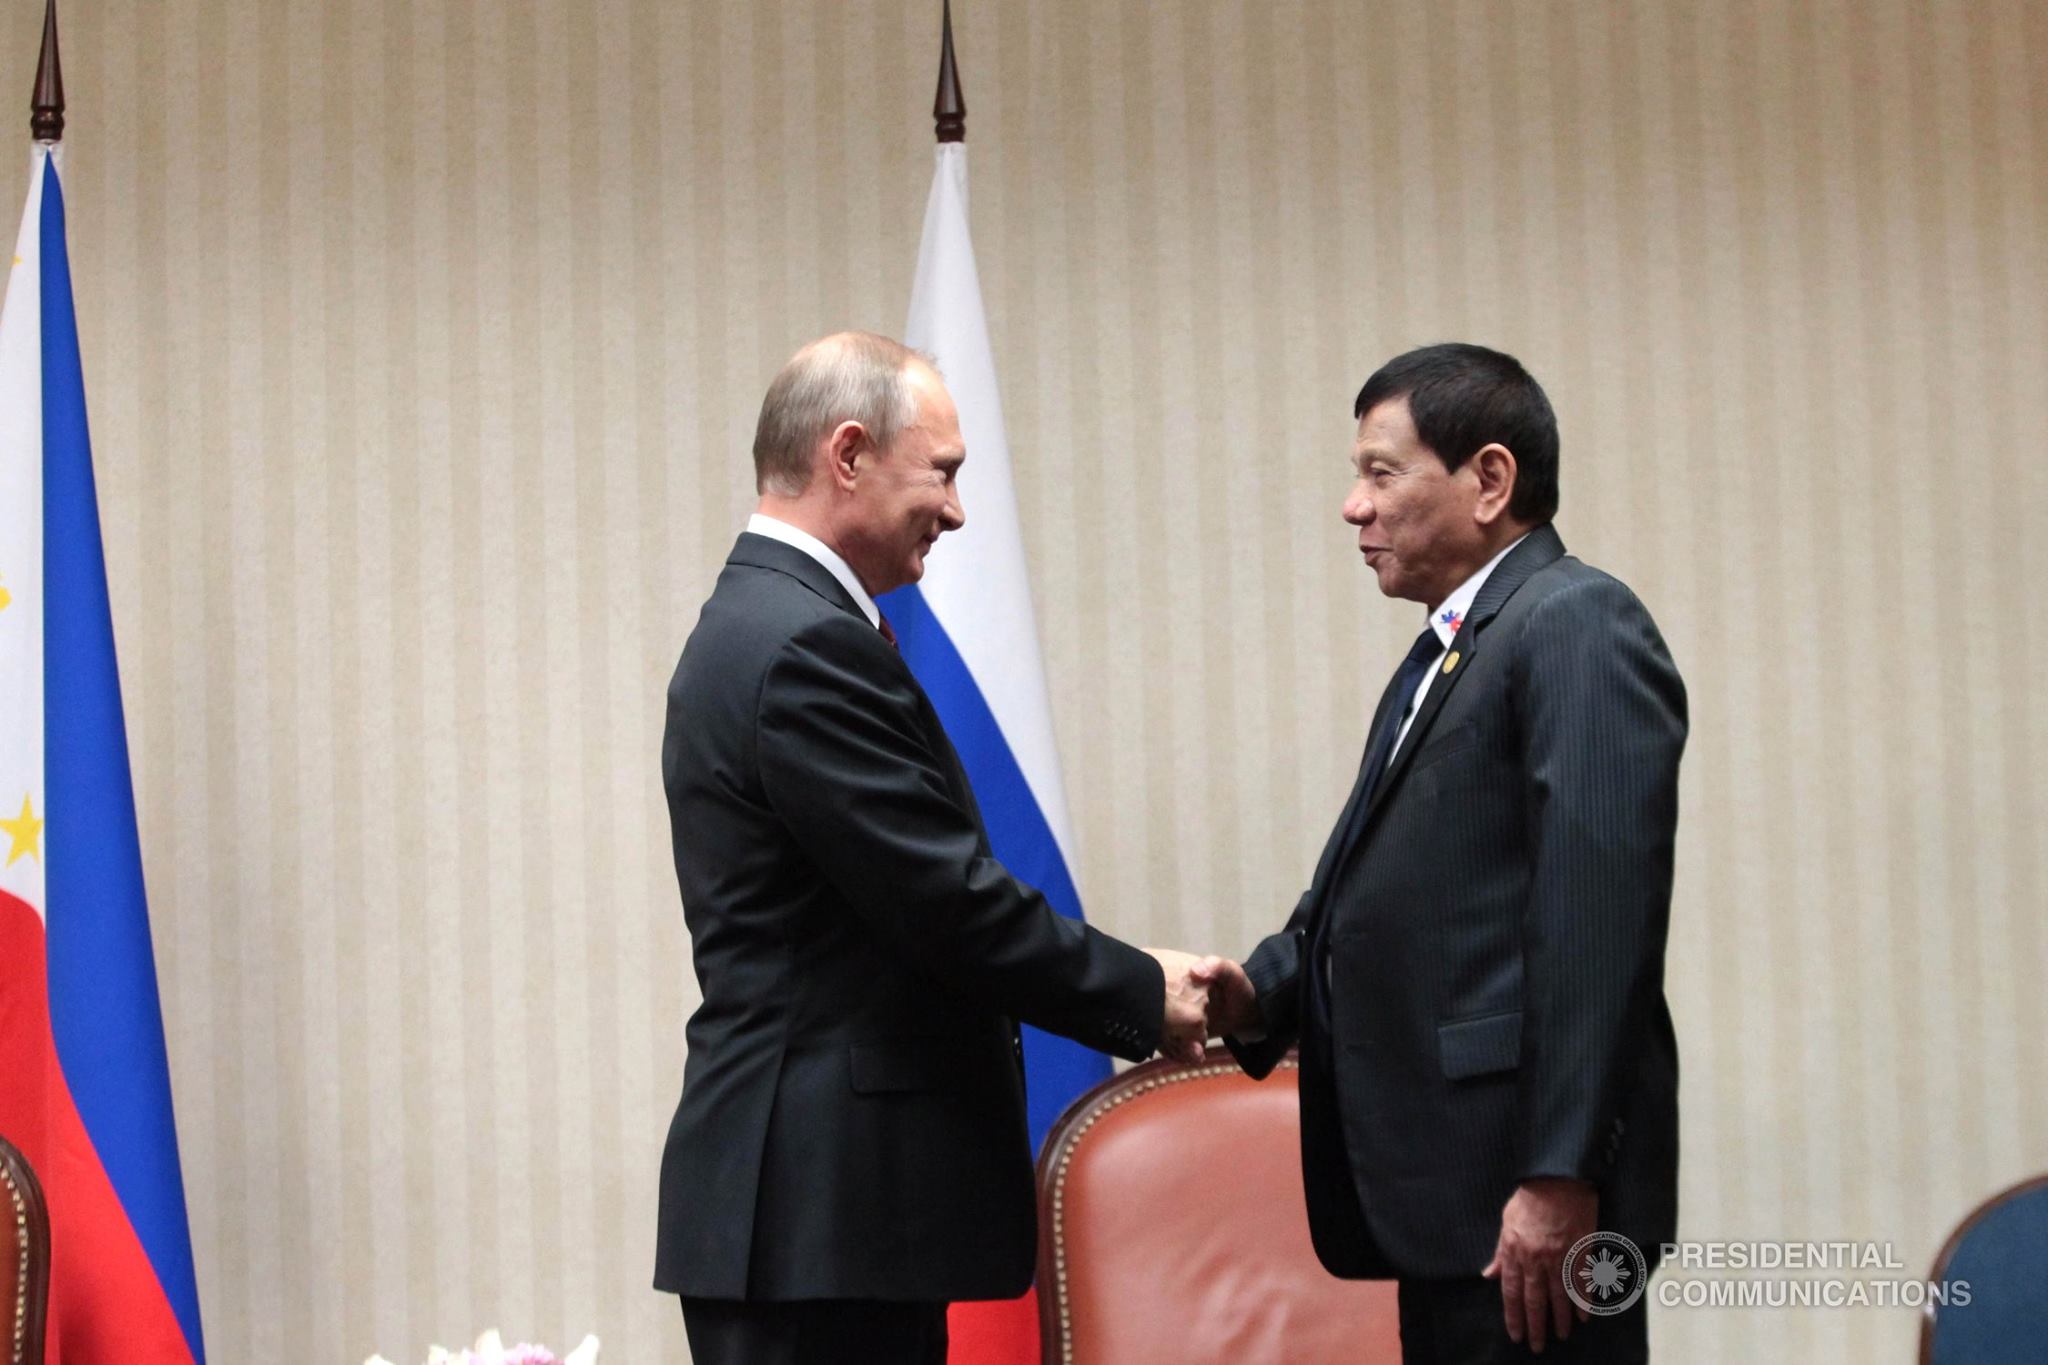 Russian Federation President Vladimir Putin is seen in this photo smiling as he and Philippine President Rodrigo Duterte shake hands during their bilateral meeting at the sidelines of the APEC Leaders' Summit in Lima, Peru in November 2016. (Presidential Communications photo)